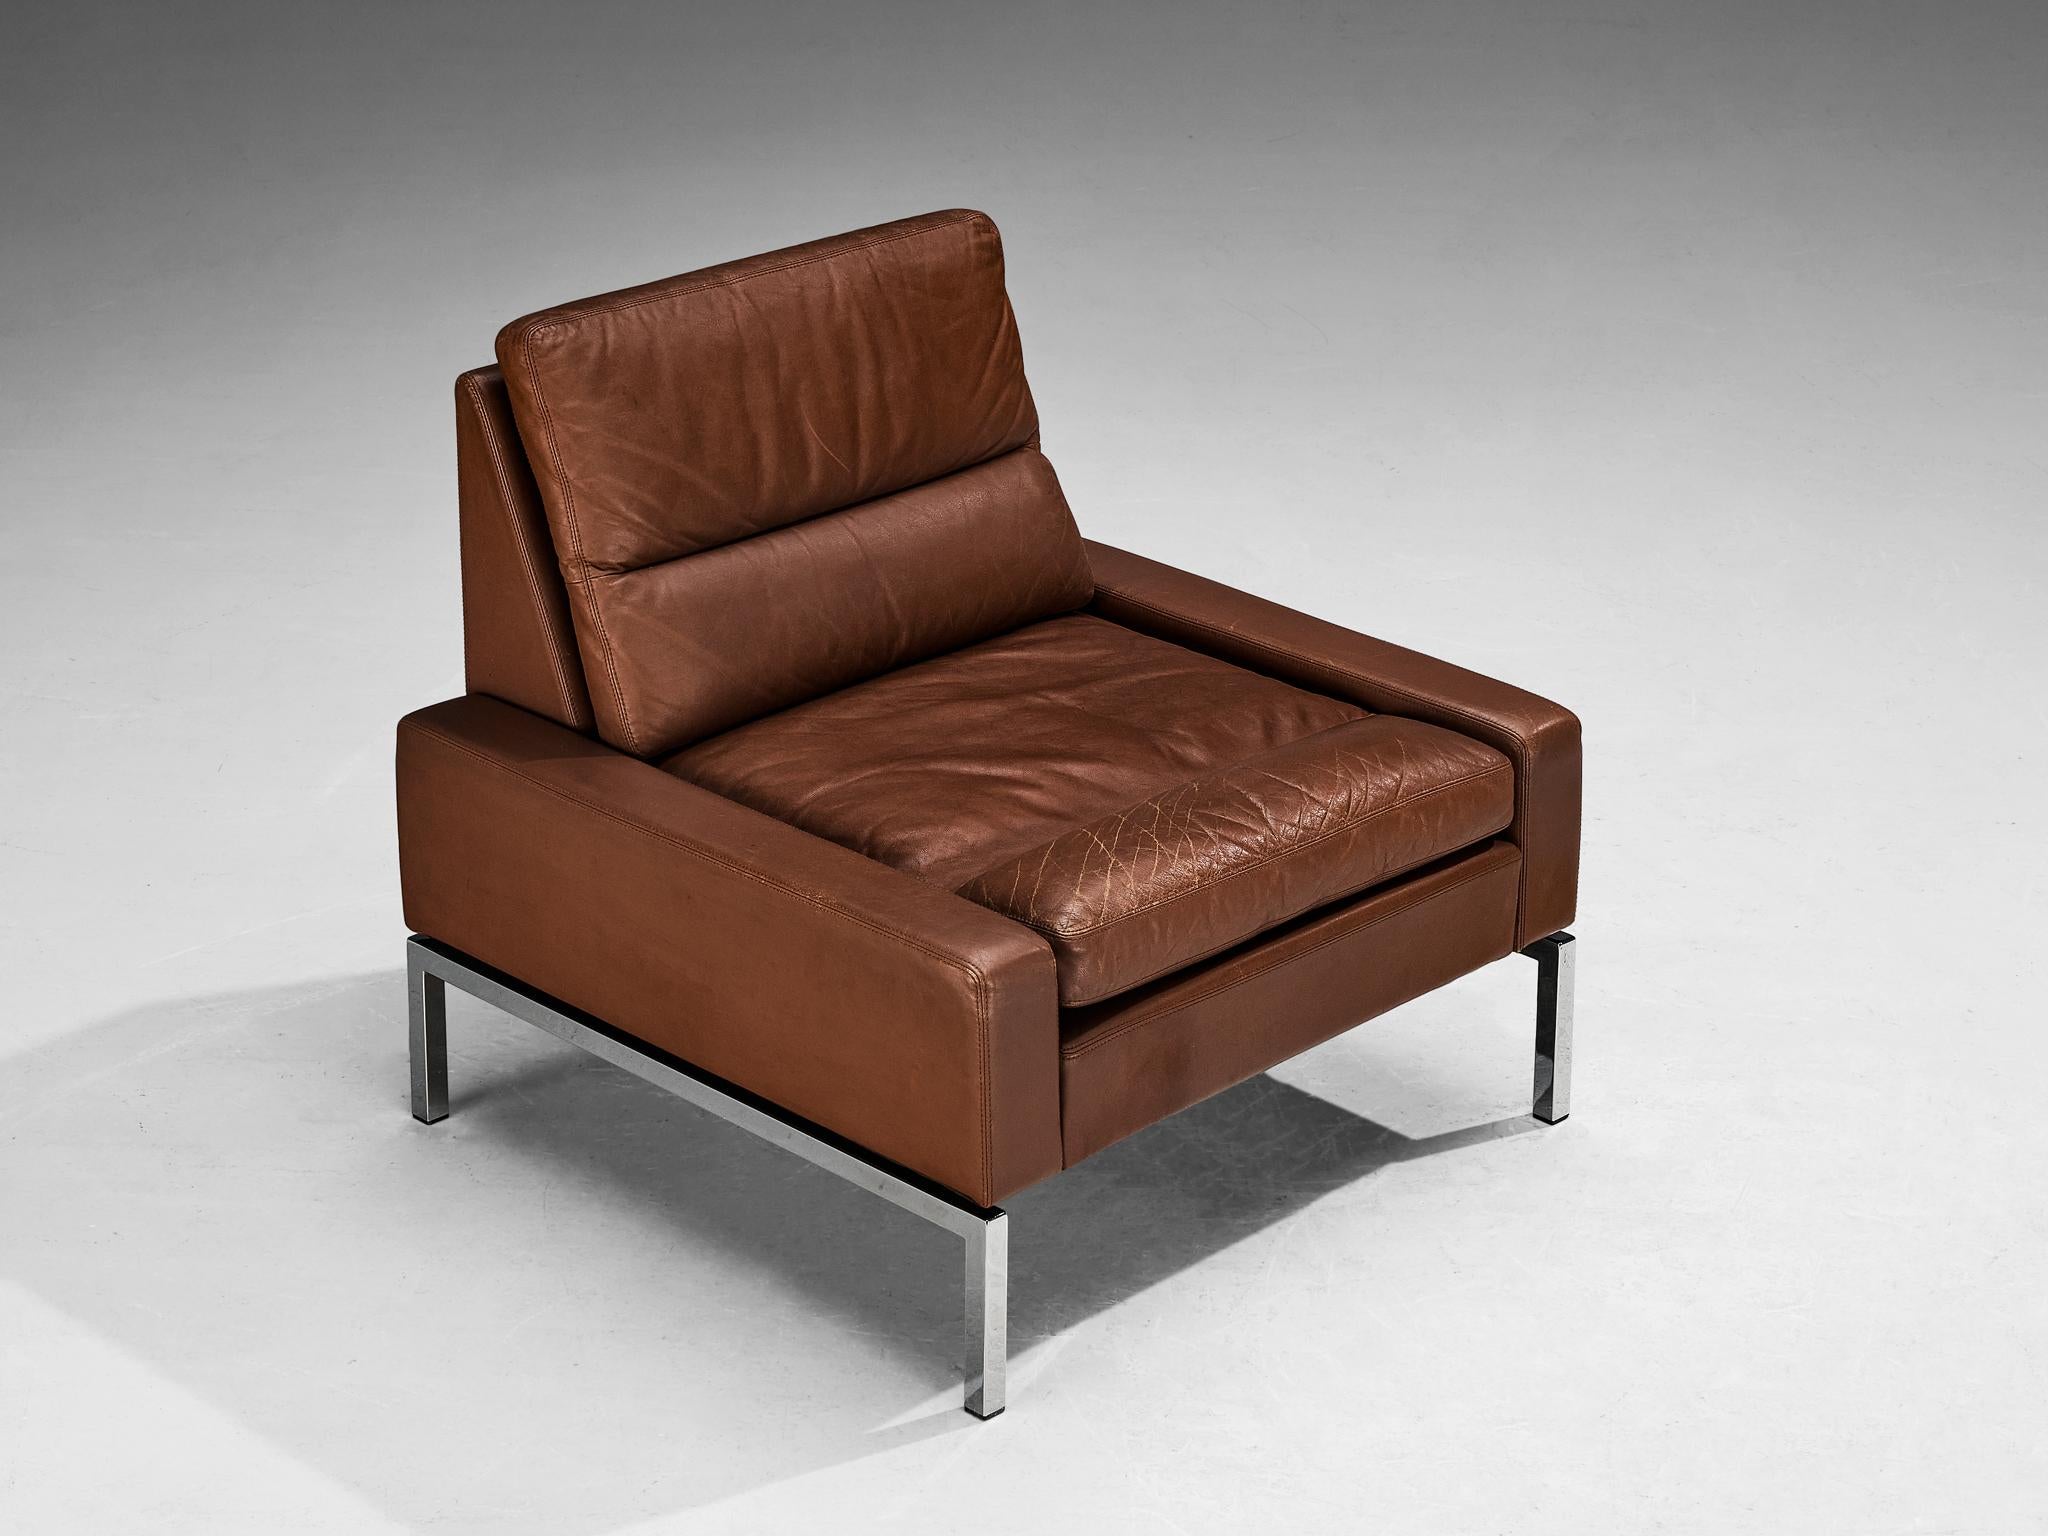 Lounge chair, steel, leather, Europe, 1980s

This comfortable lounge chair shows an elegant steel frame. The combination of steel and leather gives these lounge chairs a modern and rich appearance. Upholstered in brown leather that shows patina,